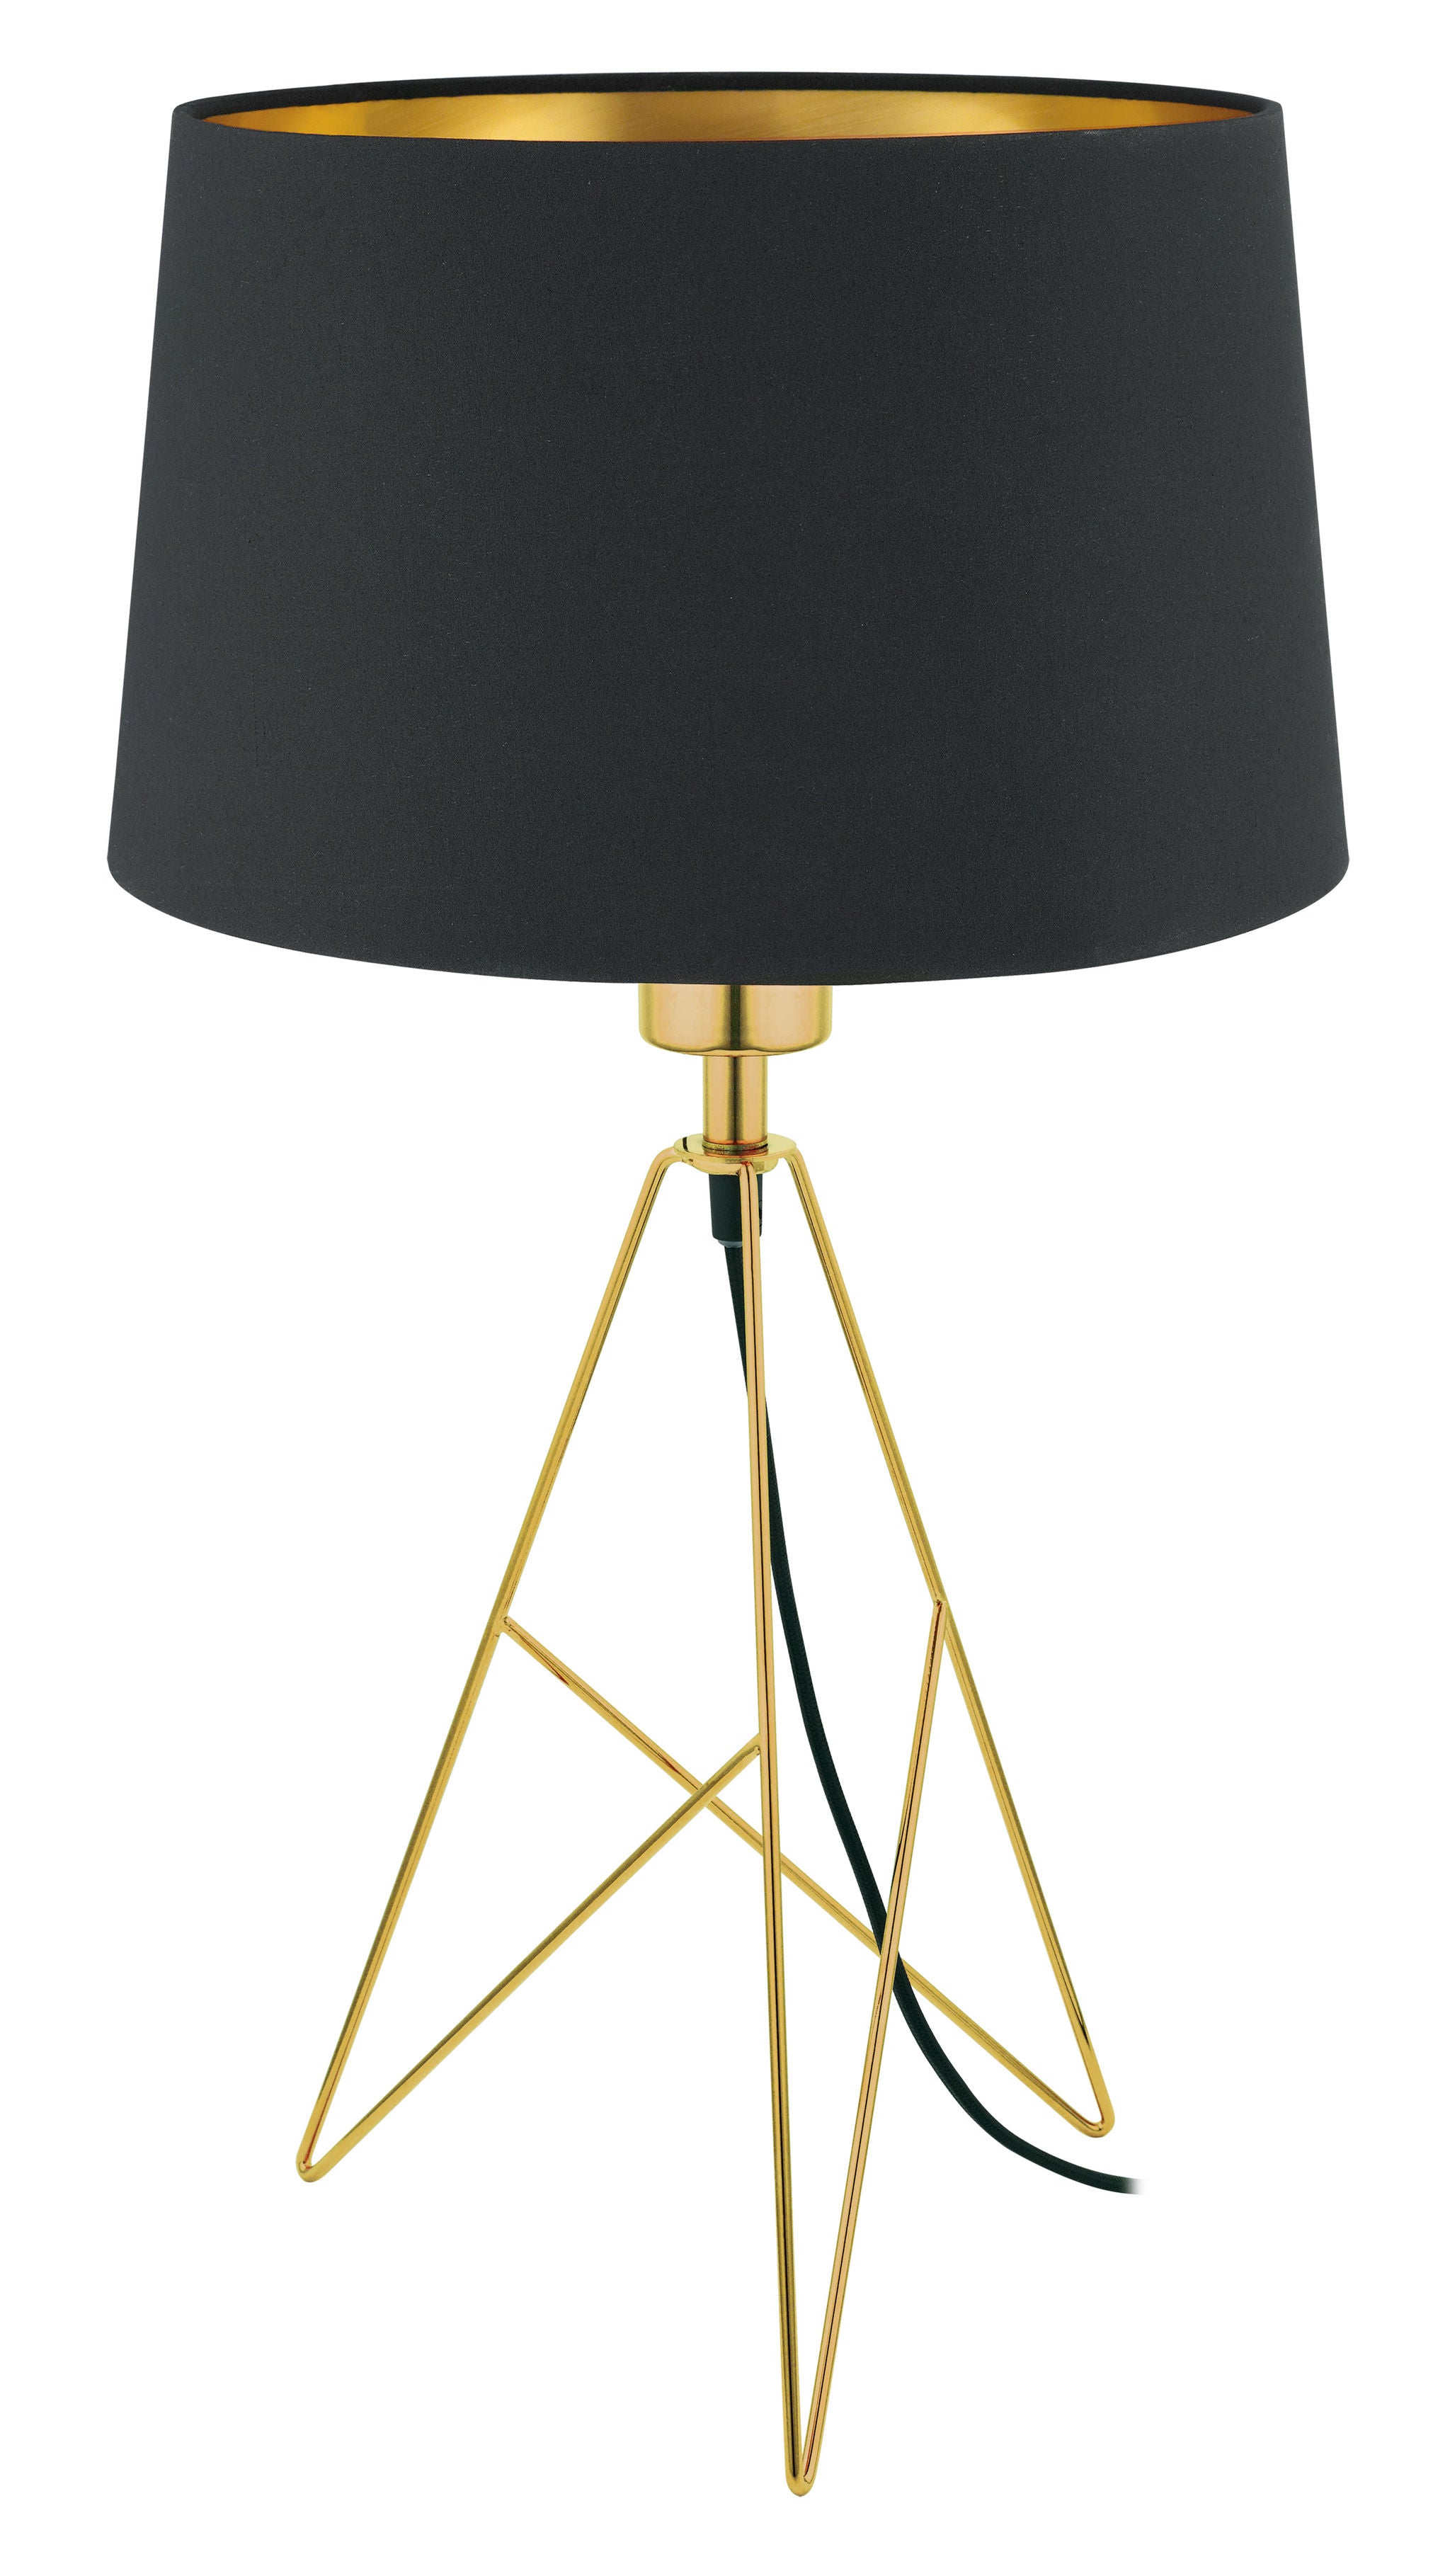 Camporale Table lamp Gold - 39179A | EGLO